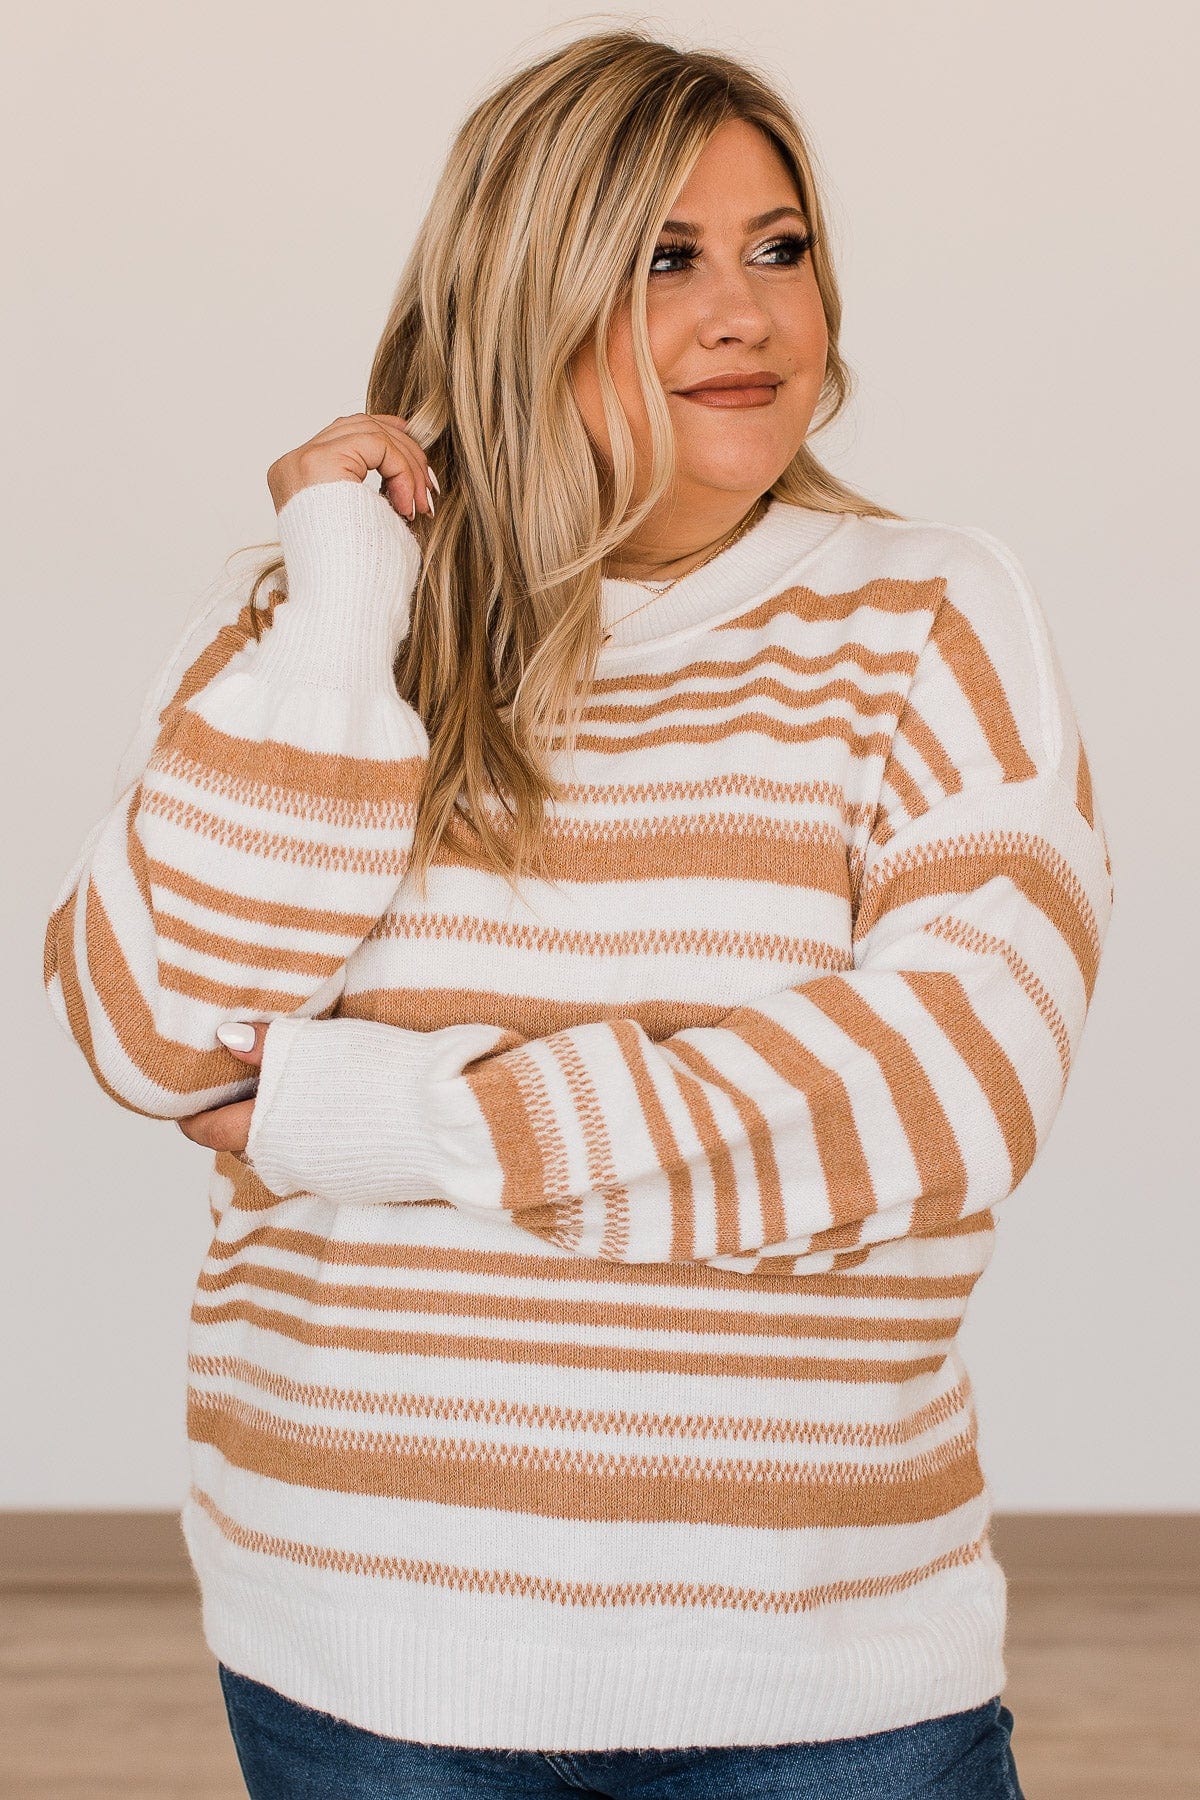 Looking For Love Striped Sweater- Ivory & Camel